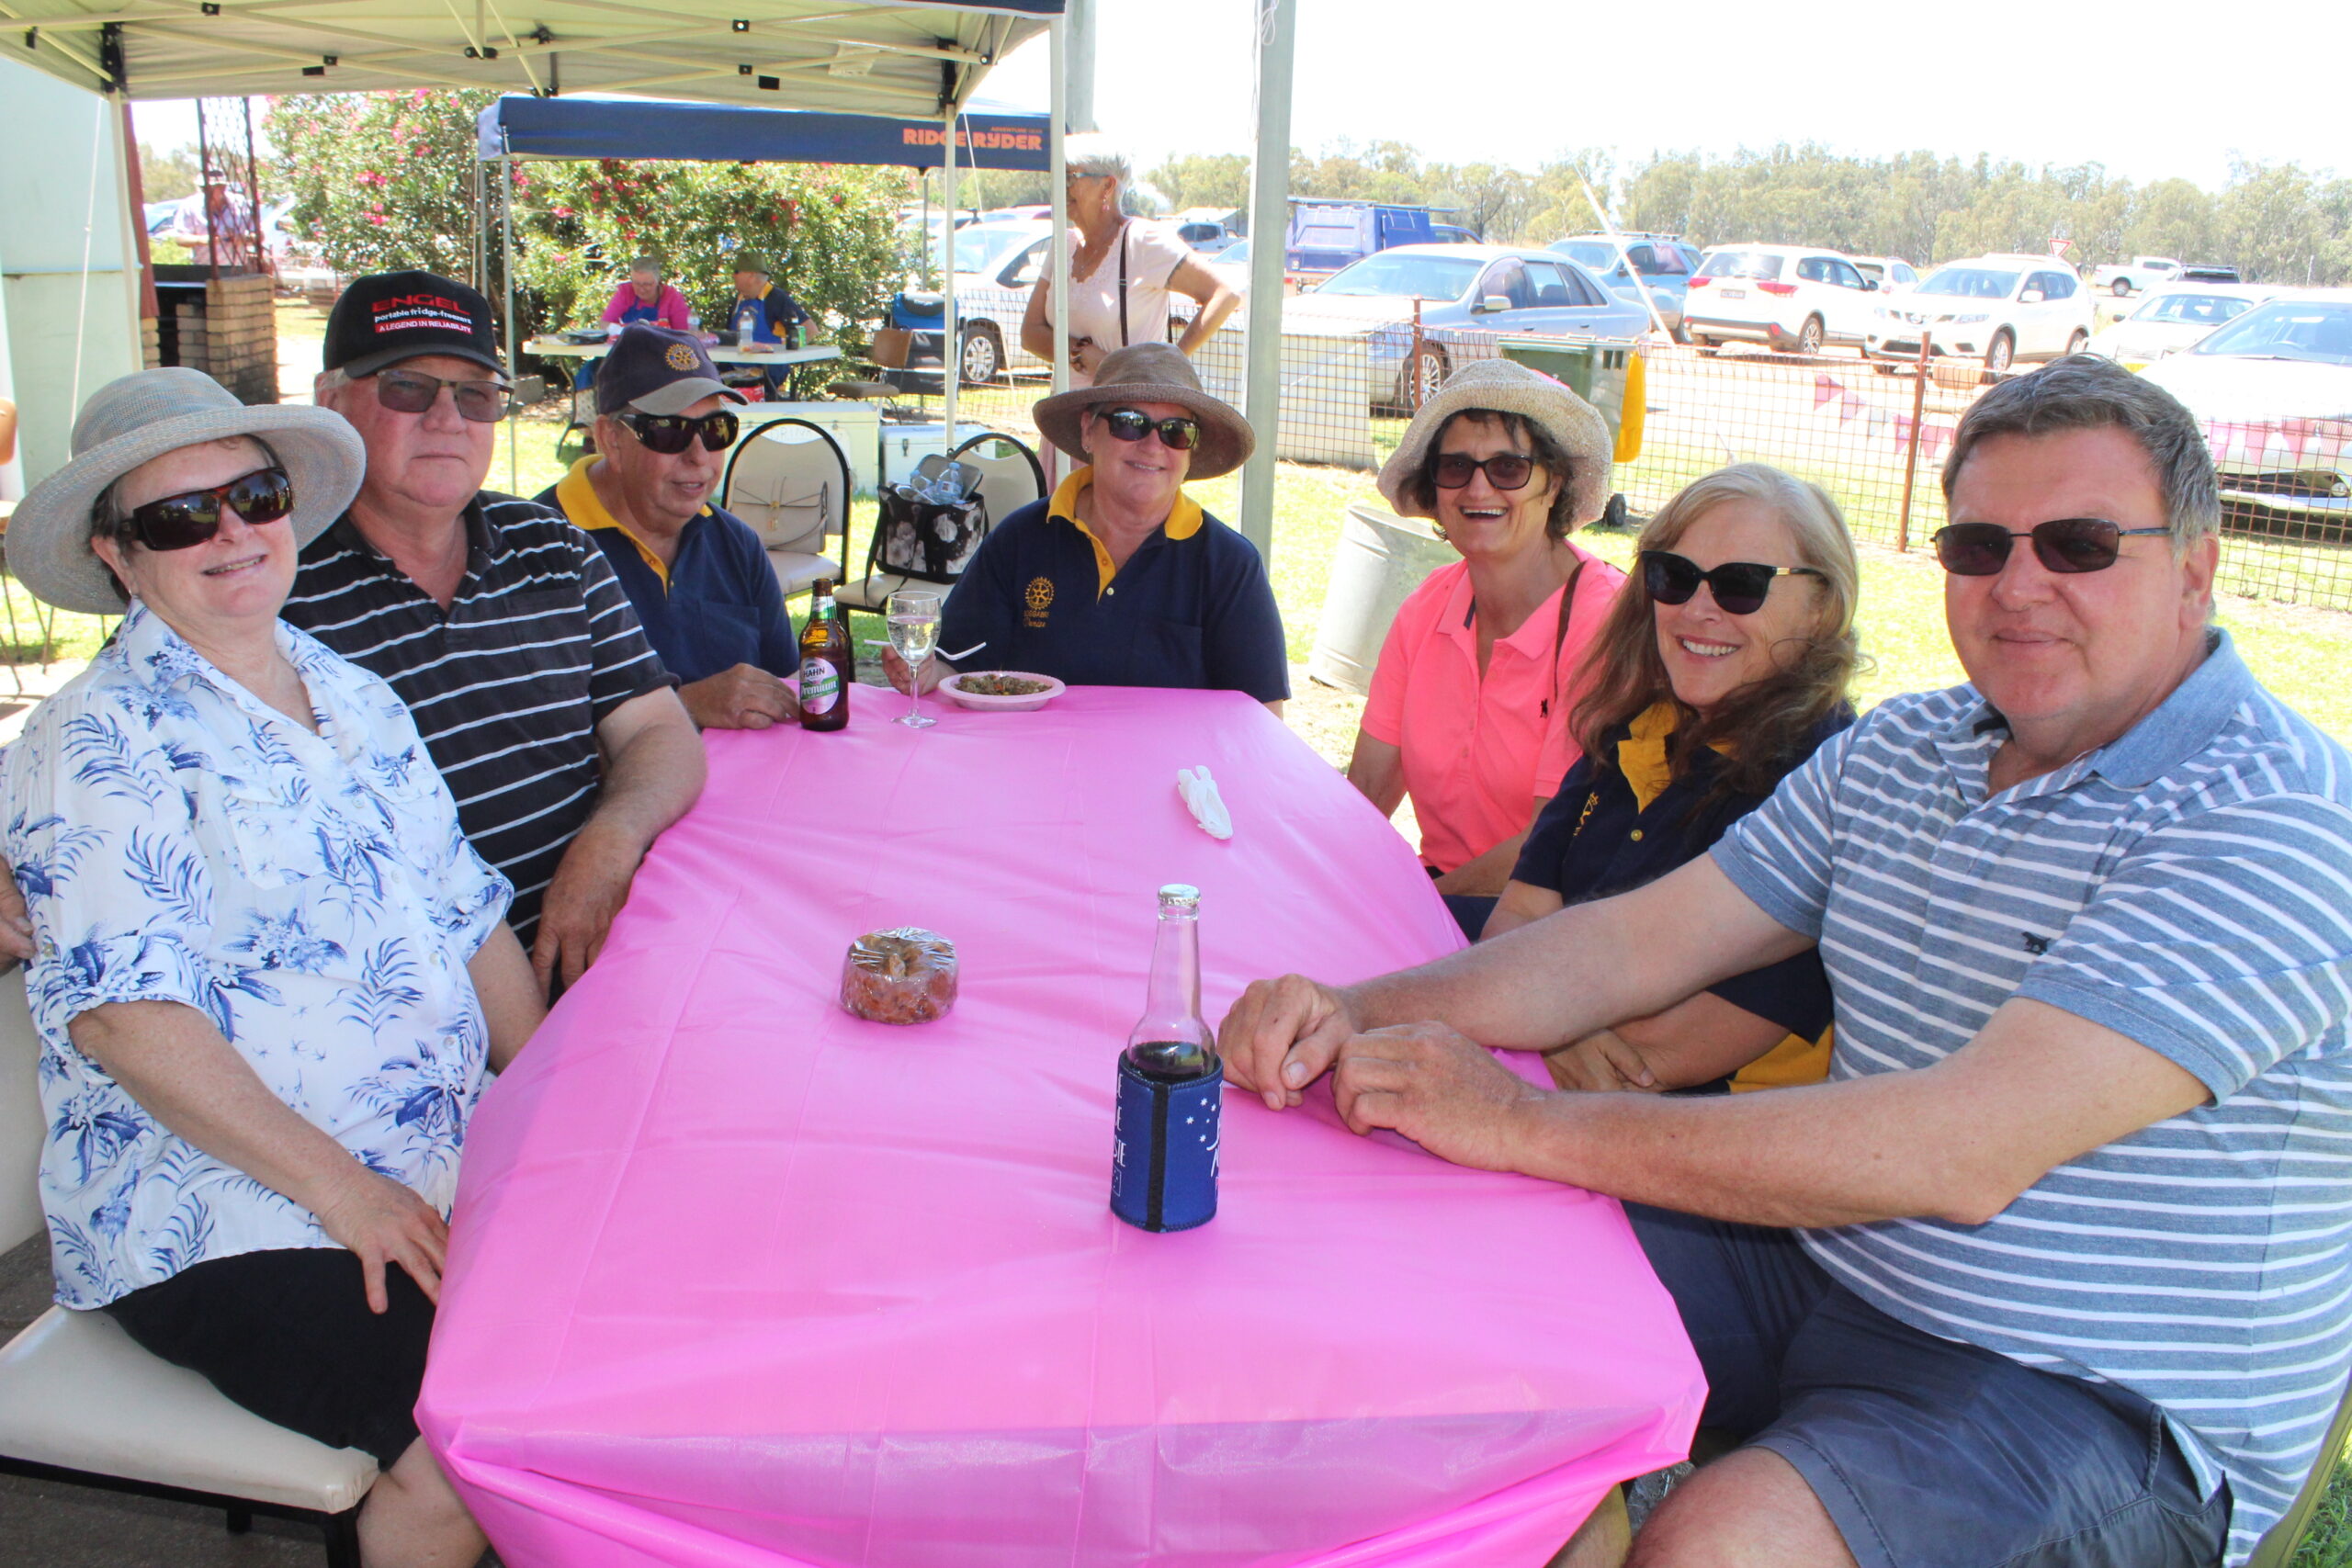 Boggabri Rotary members: Lynette and Robert Breneger, Alex and Denise McKenzie, Judy Donaldson, Maree and Michael Nott.